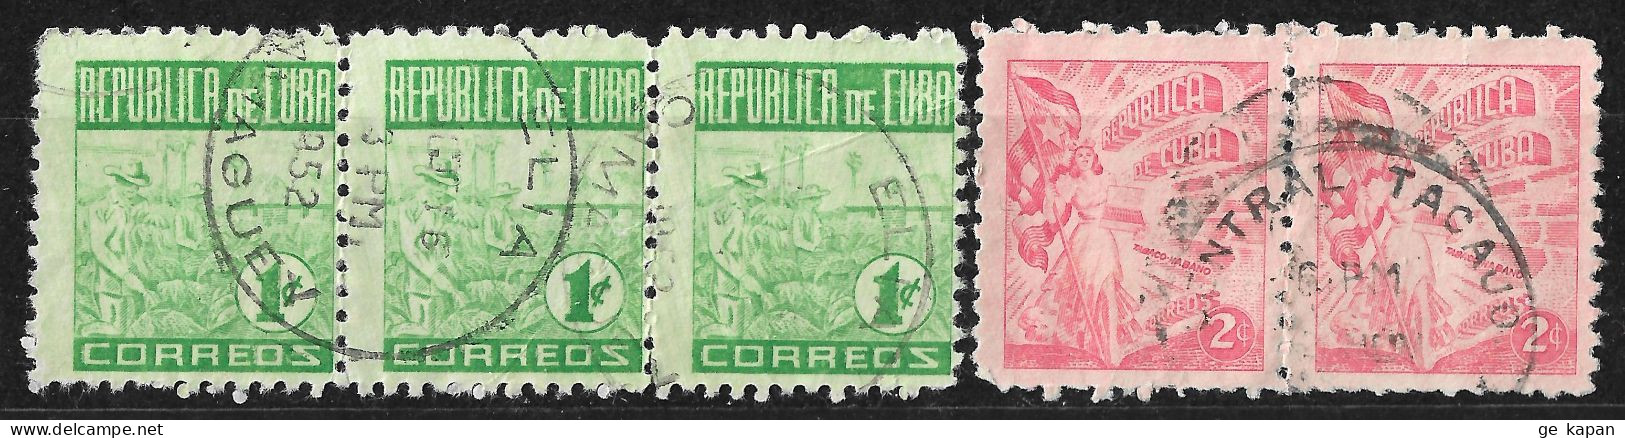 1950 CUBA Set Of Used Horizontal Strip And Pair (Michel # 229,230) CV €2.00 - Used Stamps